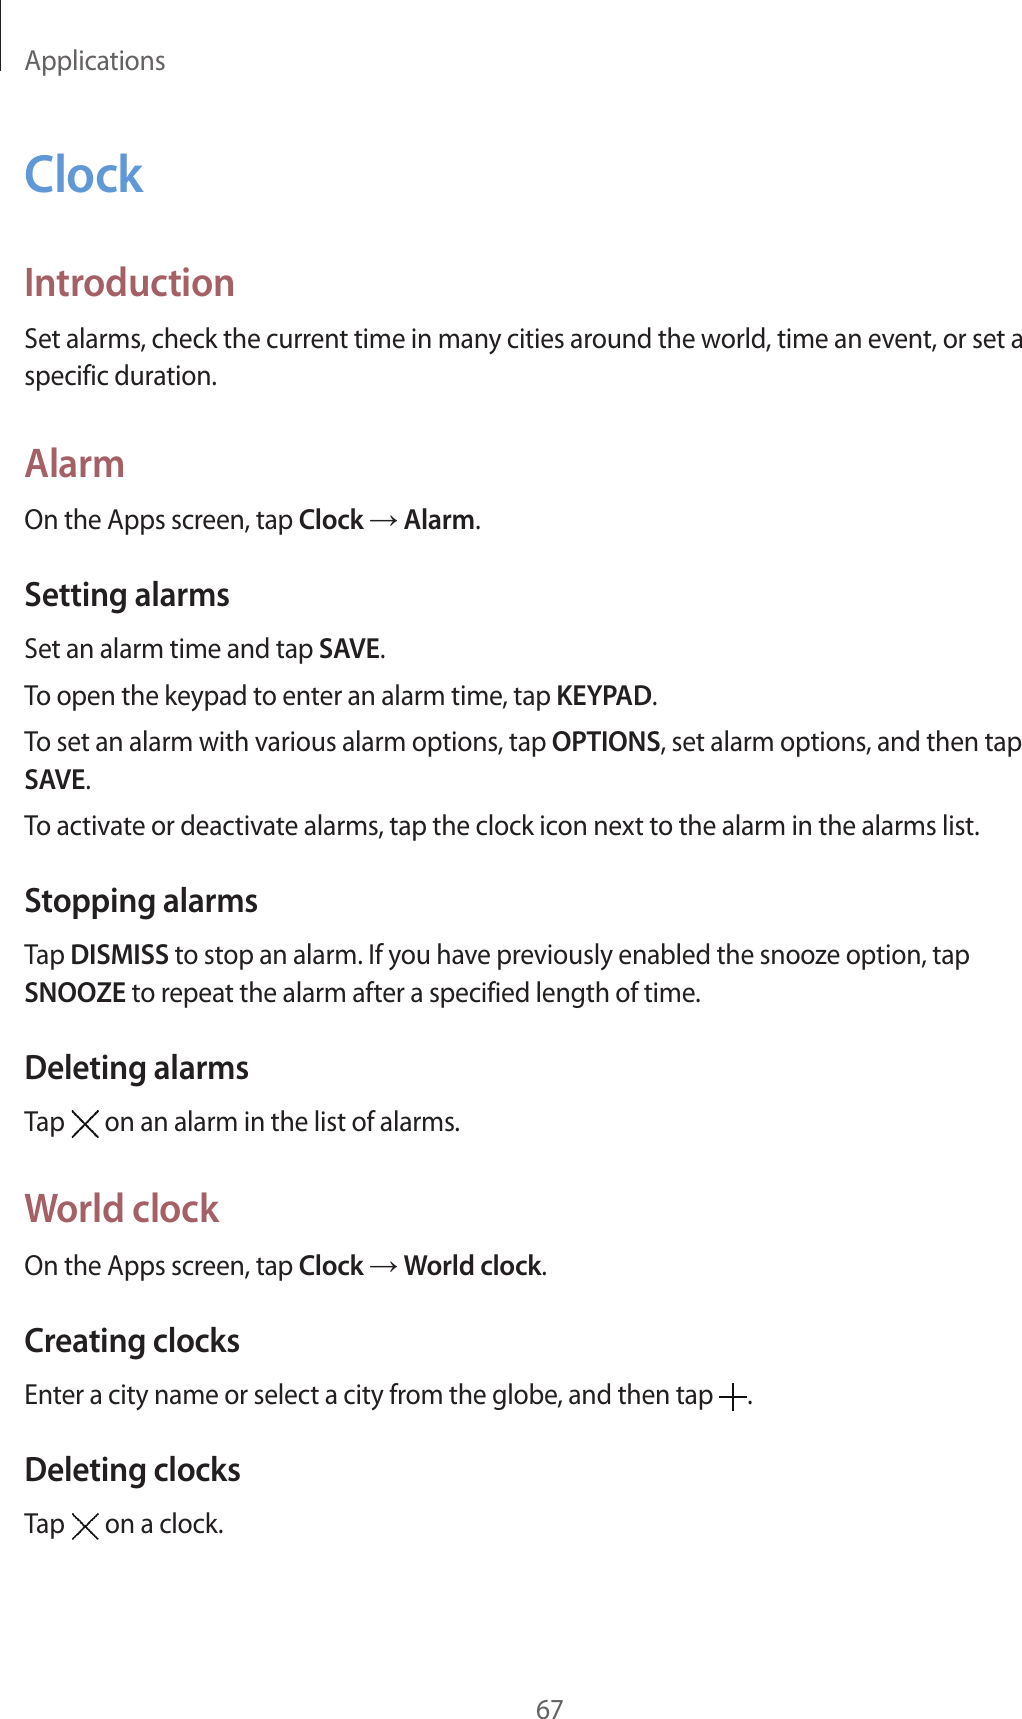 Applications67ClockIntroductionSet alarms, check the current time in many cities around the world, time an event, or set a specific duration.AlarmOn the Apps screen, tap Clock → Alarm.Setting alarmsSet an alarm time and tap SAVE.To open the keypad to enter an alarm time, tap KEYPAD.To set an alarm with various alarm options, tap OPTIONS, set alarm options, and then tap SAVE.To activate or deactivate alarms, tap the clock icon next to the alarm in the alarms list.Stopping alarmsTap DISMISS to stop an alarm. If you have previously enabled the snooze option, tap SNOOZE to repeat the alarm after a specified length of time.Deleting alarmsTap   on an alarm in the list of alarms.World clockOn the Apps screen, tap Clock → World clock.Creating clocksEnter a city name or select a city from the globe, and then tap  .Deleting clocksTap   on a clock.